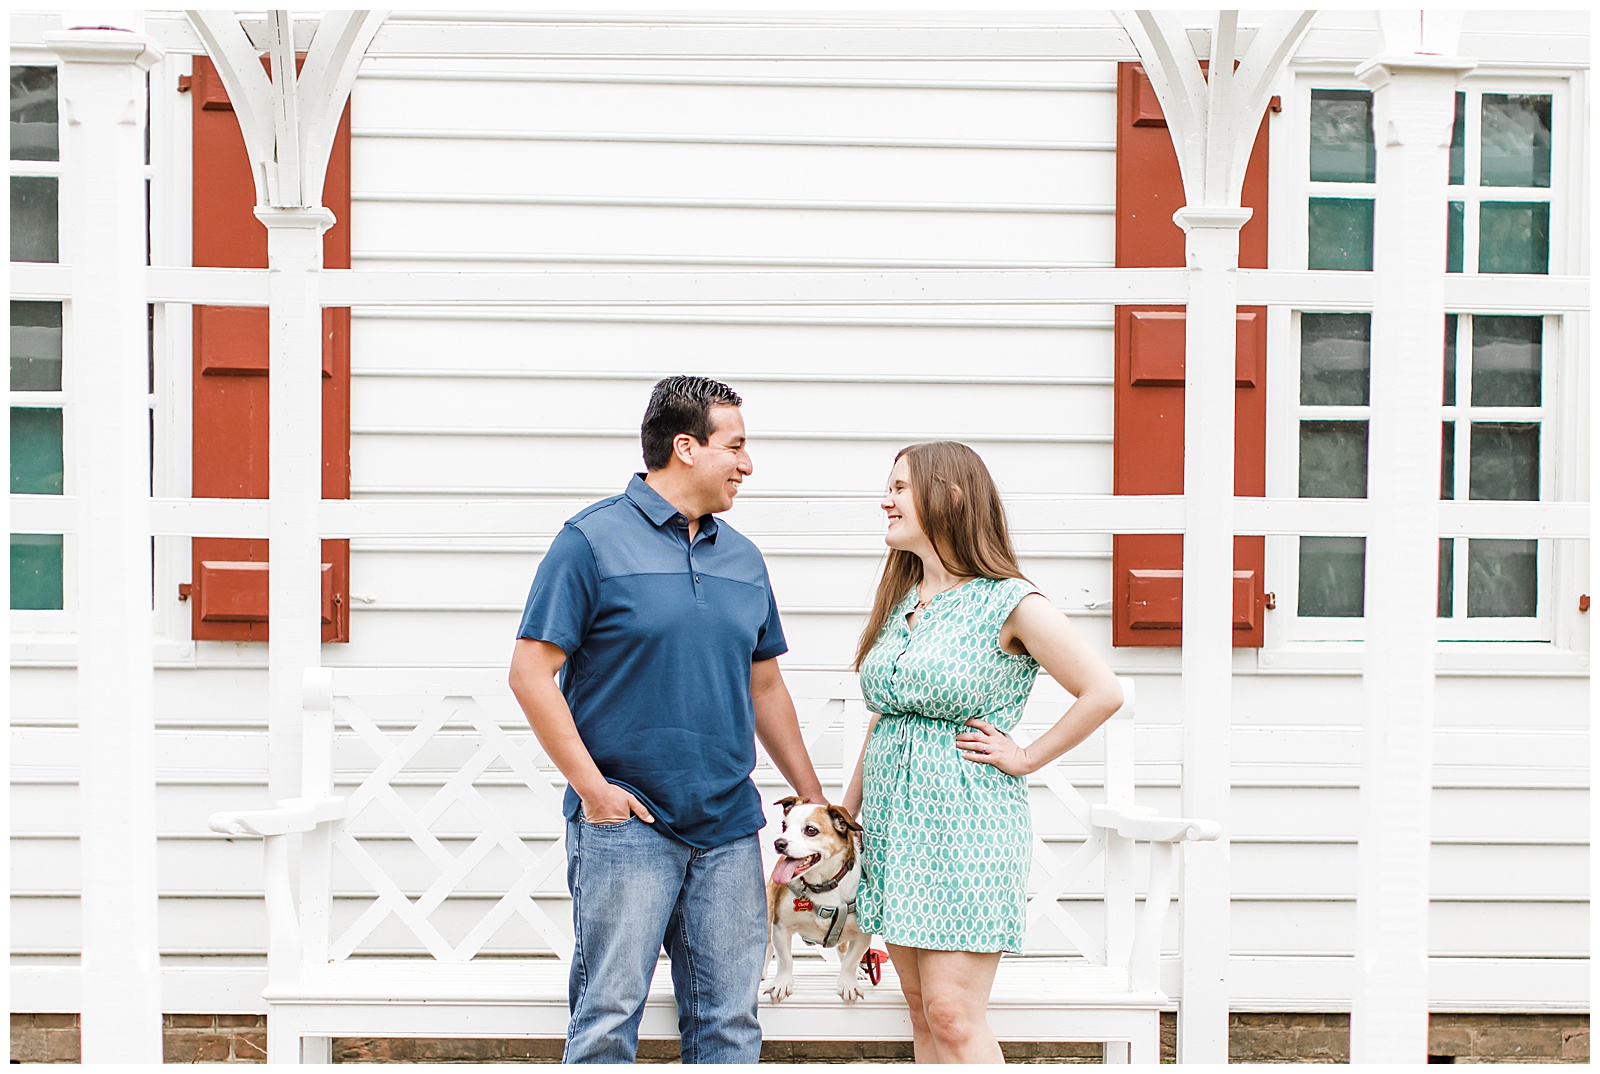 spring-colonial-williamsburg-engagement-session_0002.jpg